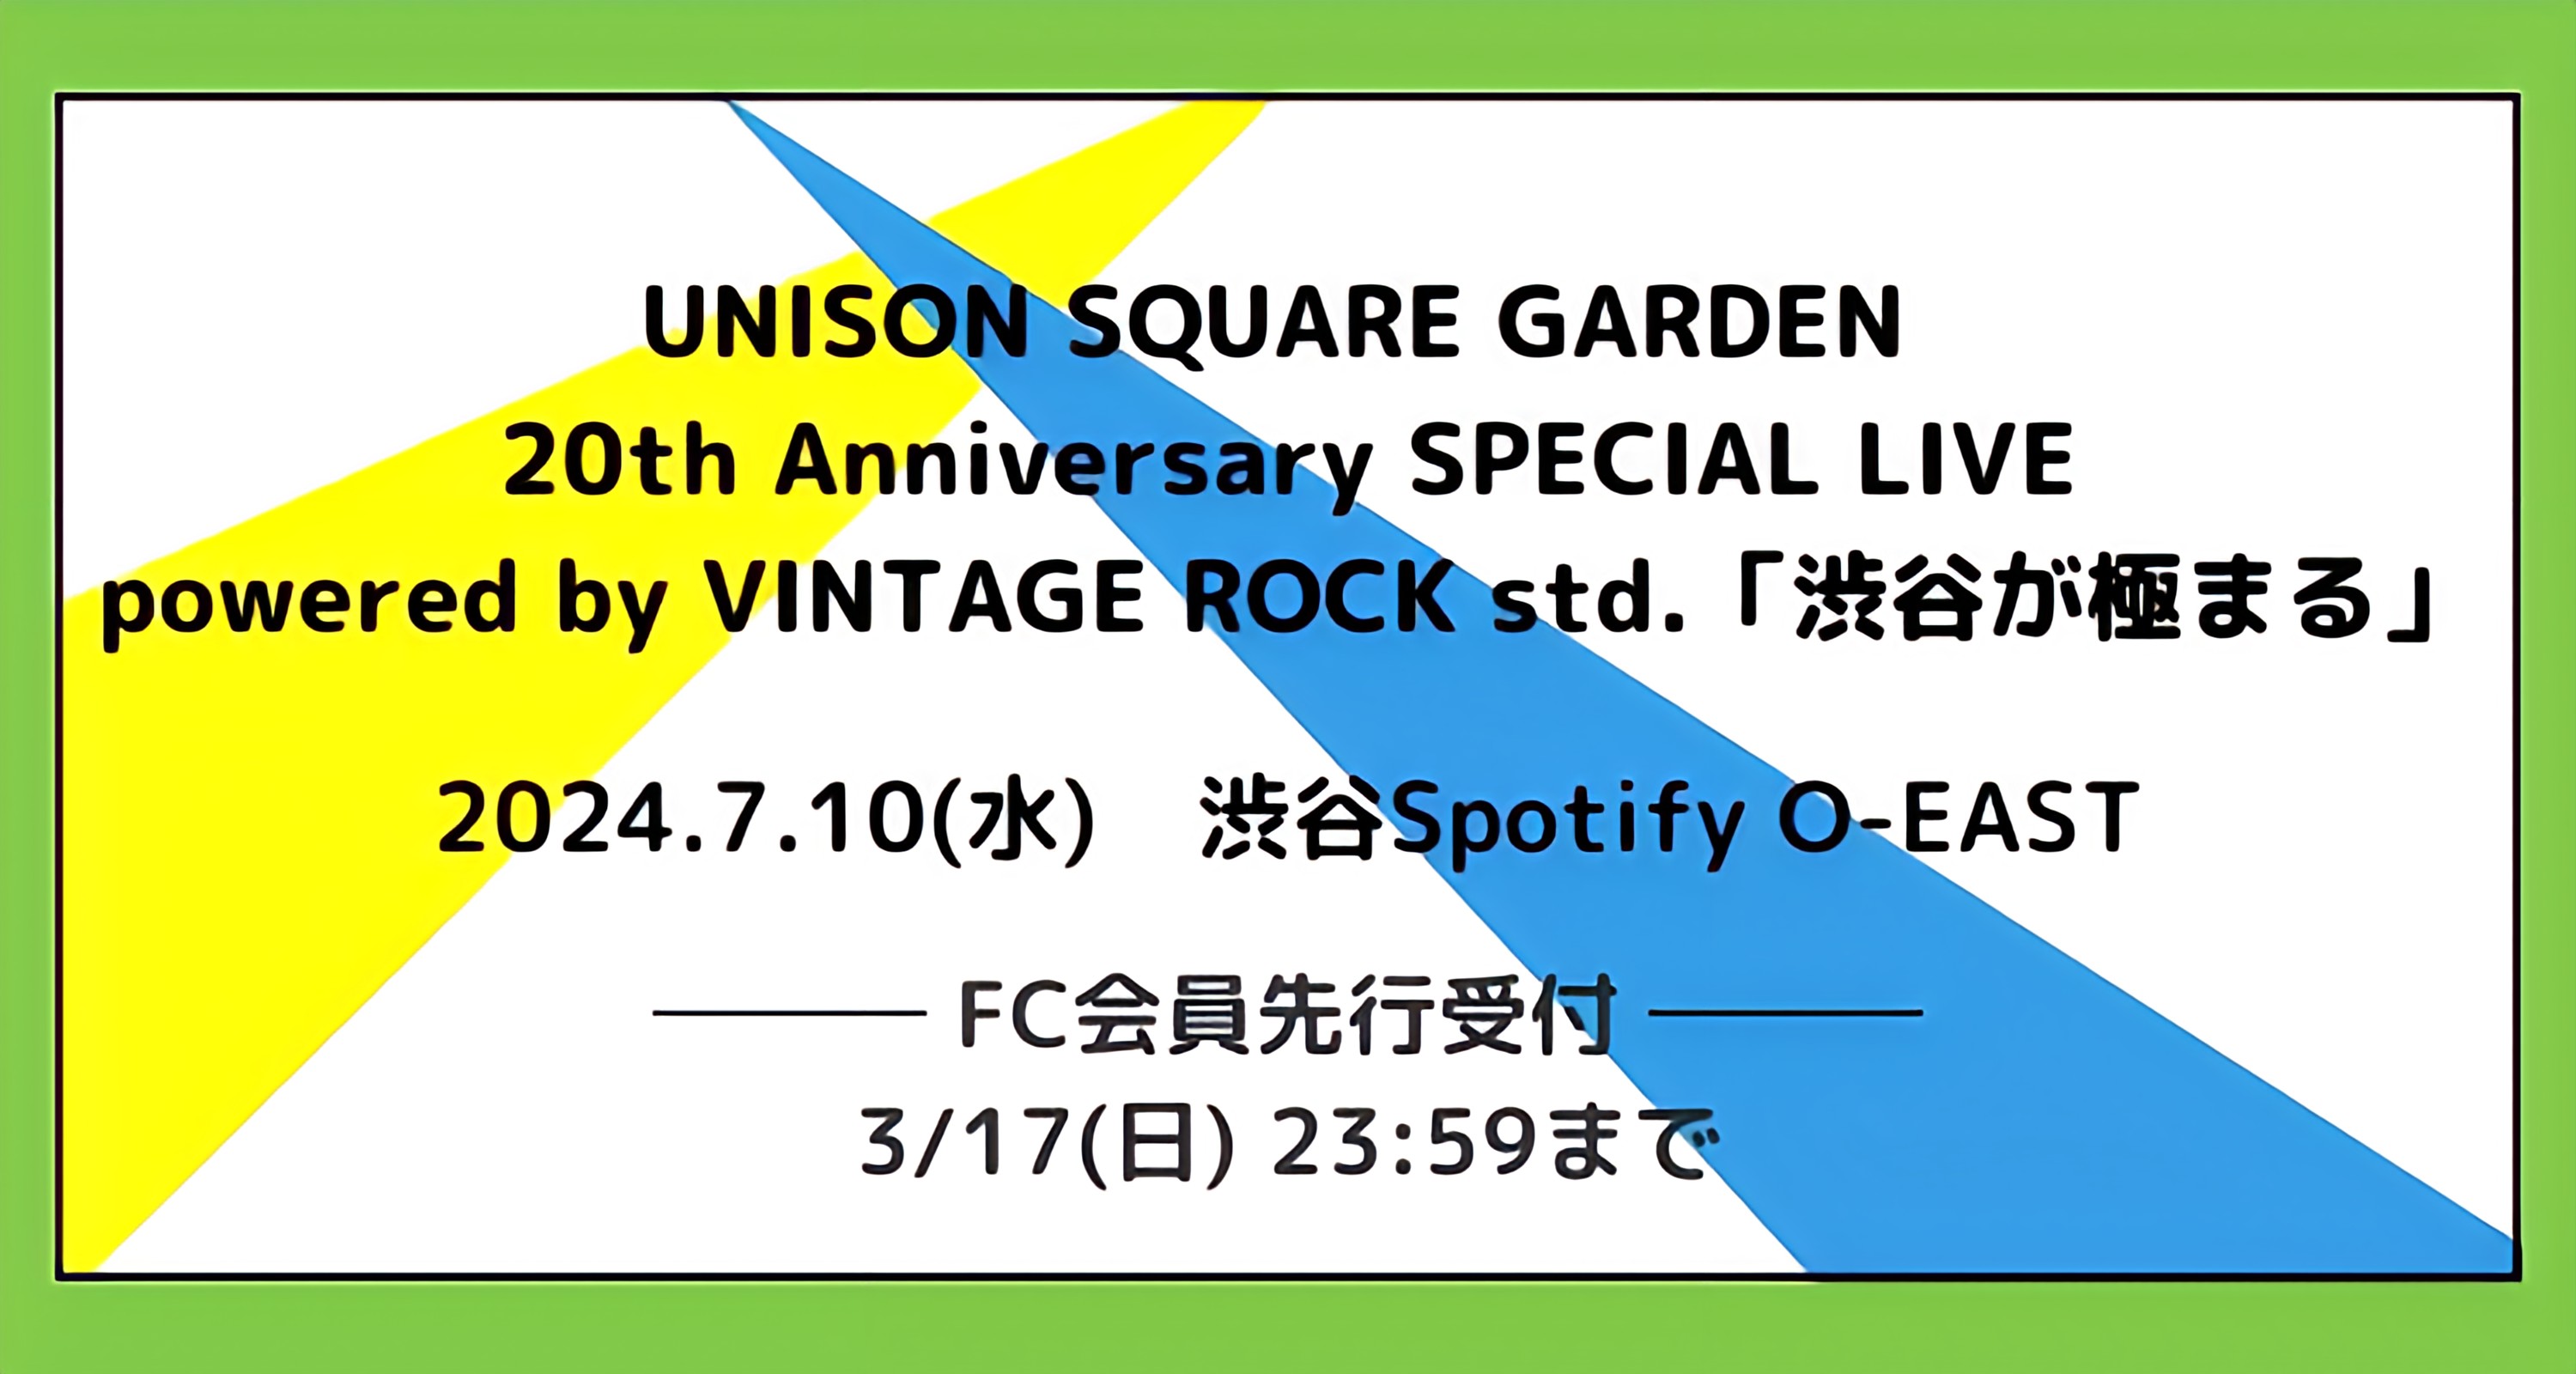 UNISON SQUARE GARDEN 20th anniversary SPECIAL LIVE powered by VINTAGE ROCK std.「渋谷が極まる」にa flood of circleの出演決定！Black Magic Fun Club先行受付スタート！！